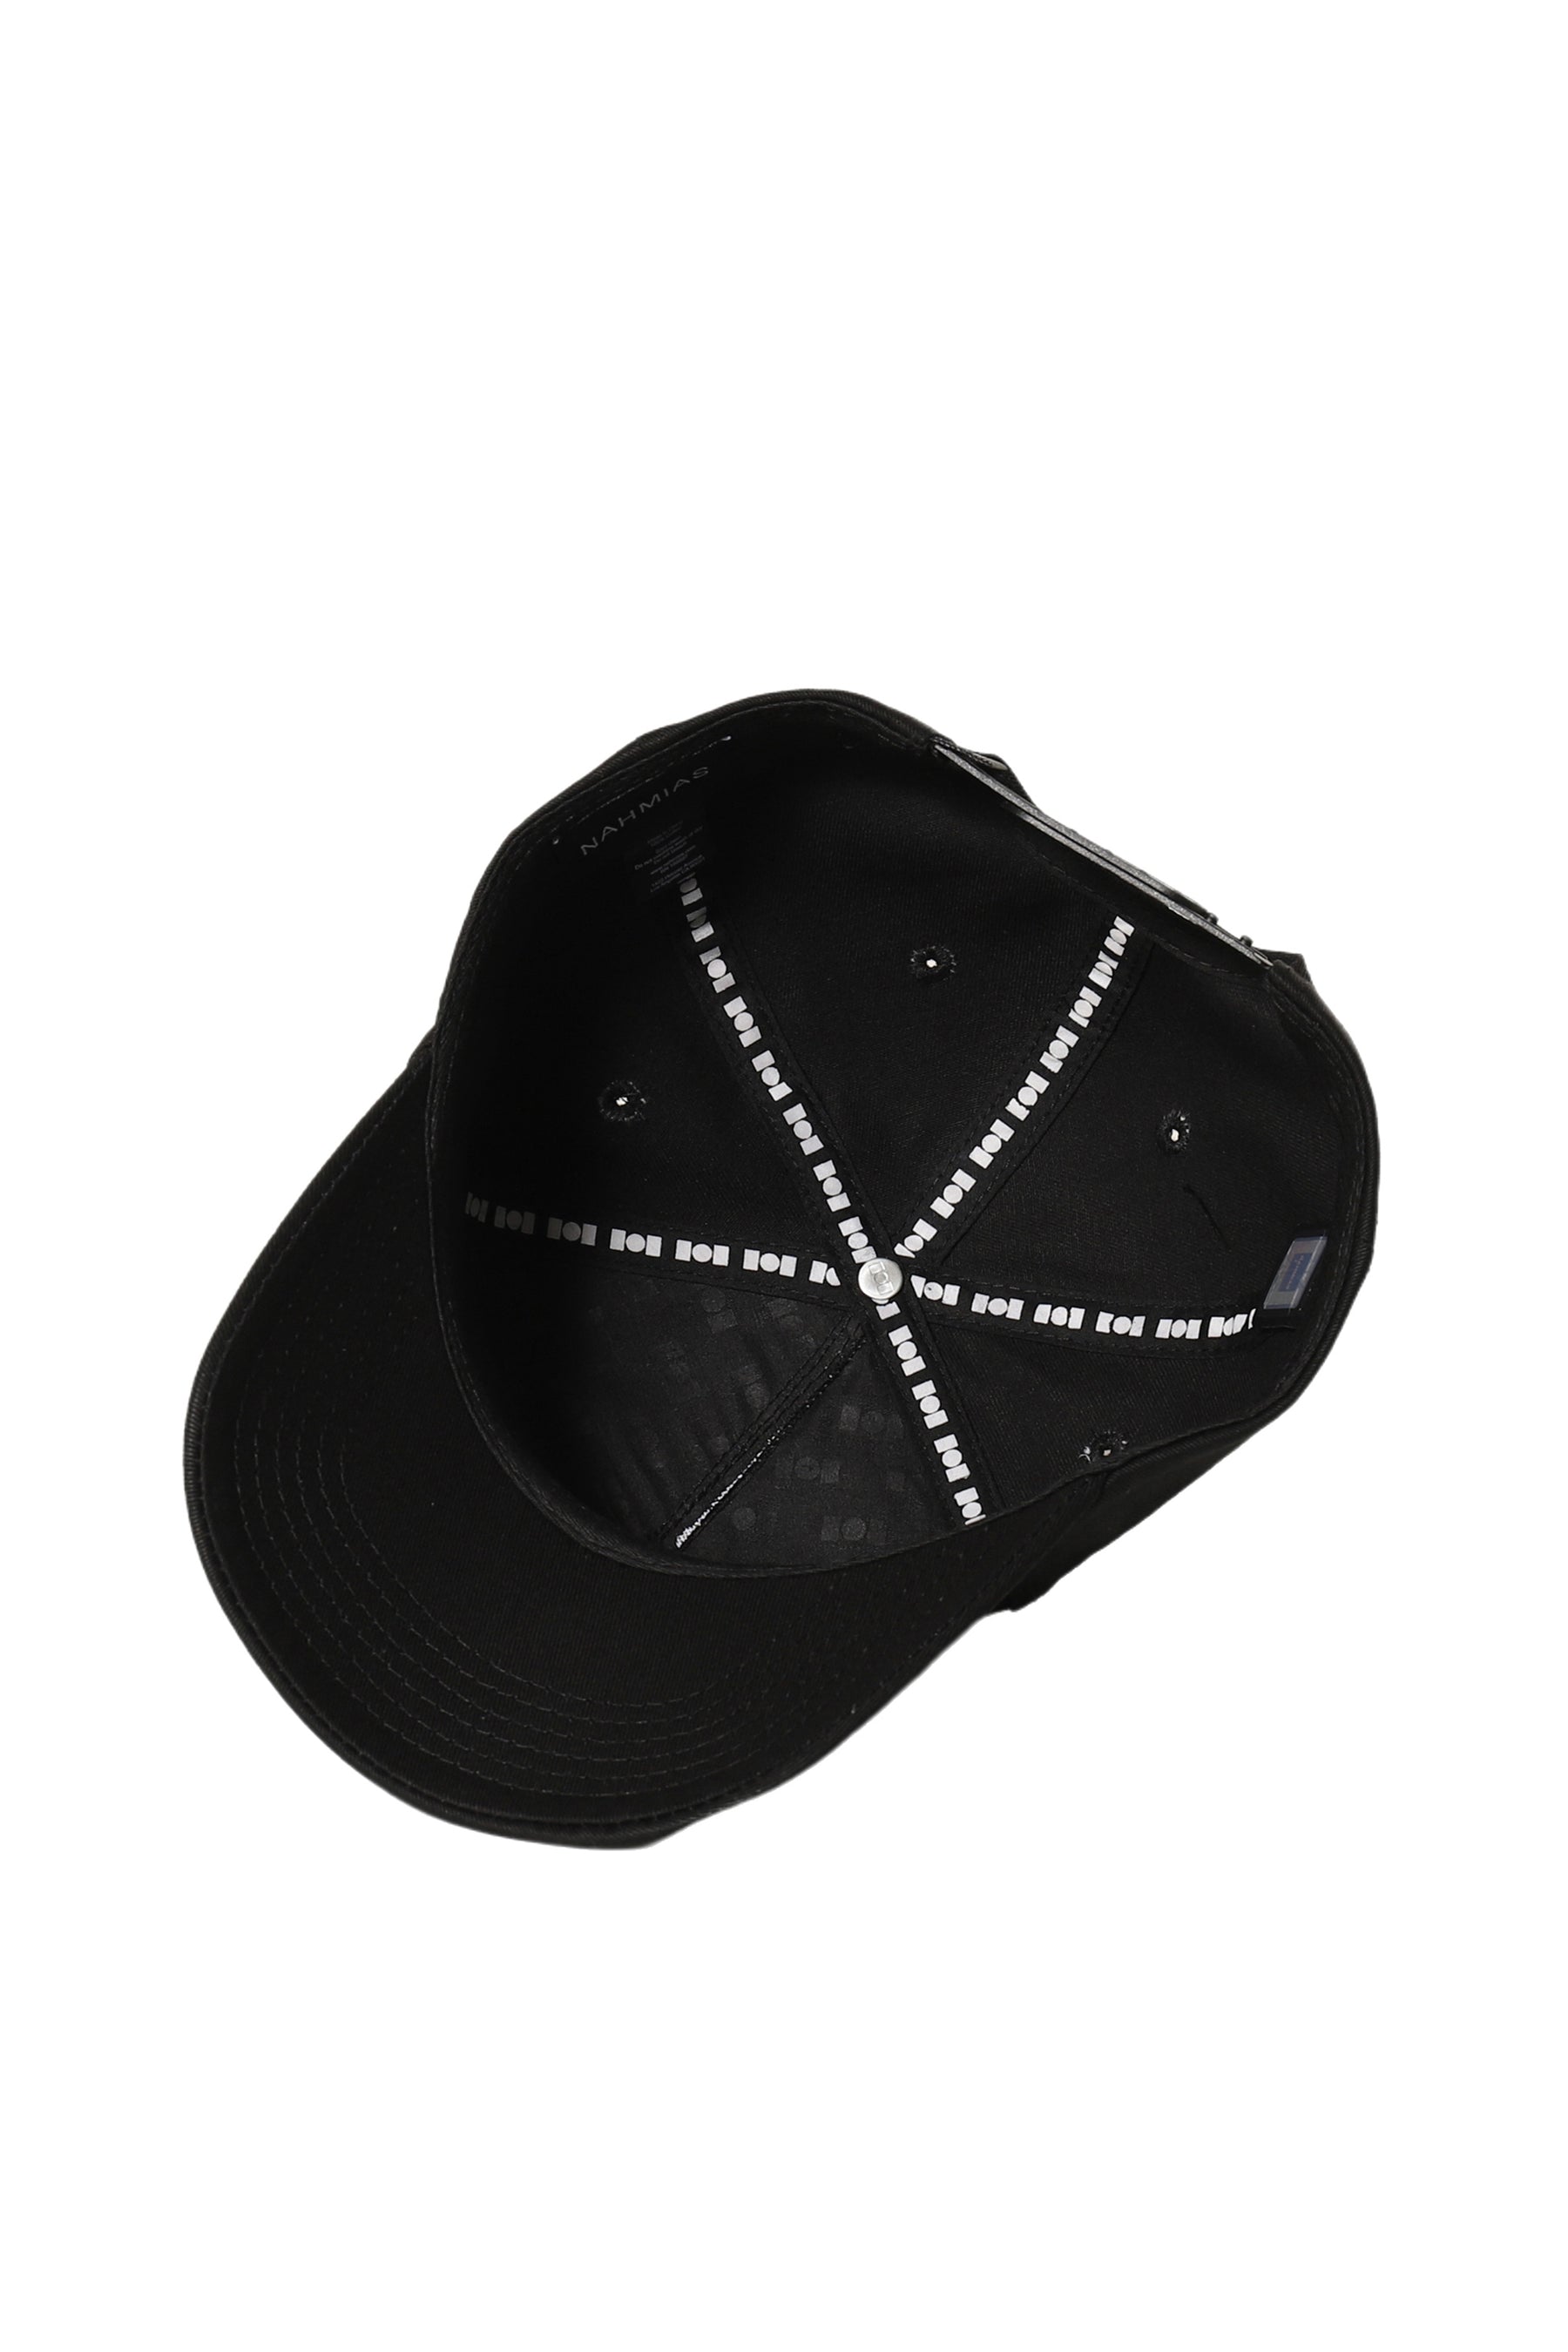 VINTAGE MIRACLE ACADEMY HAT / BLK